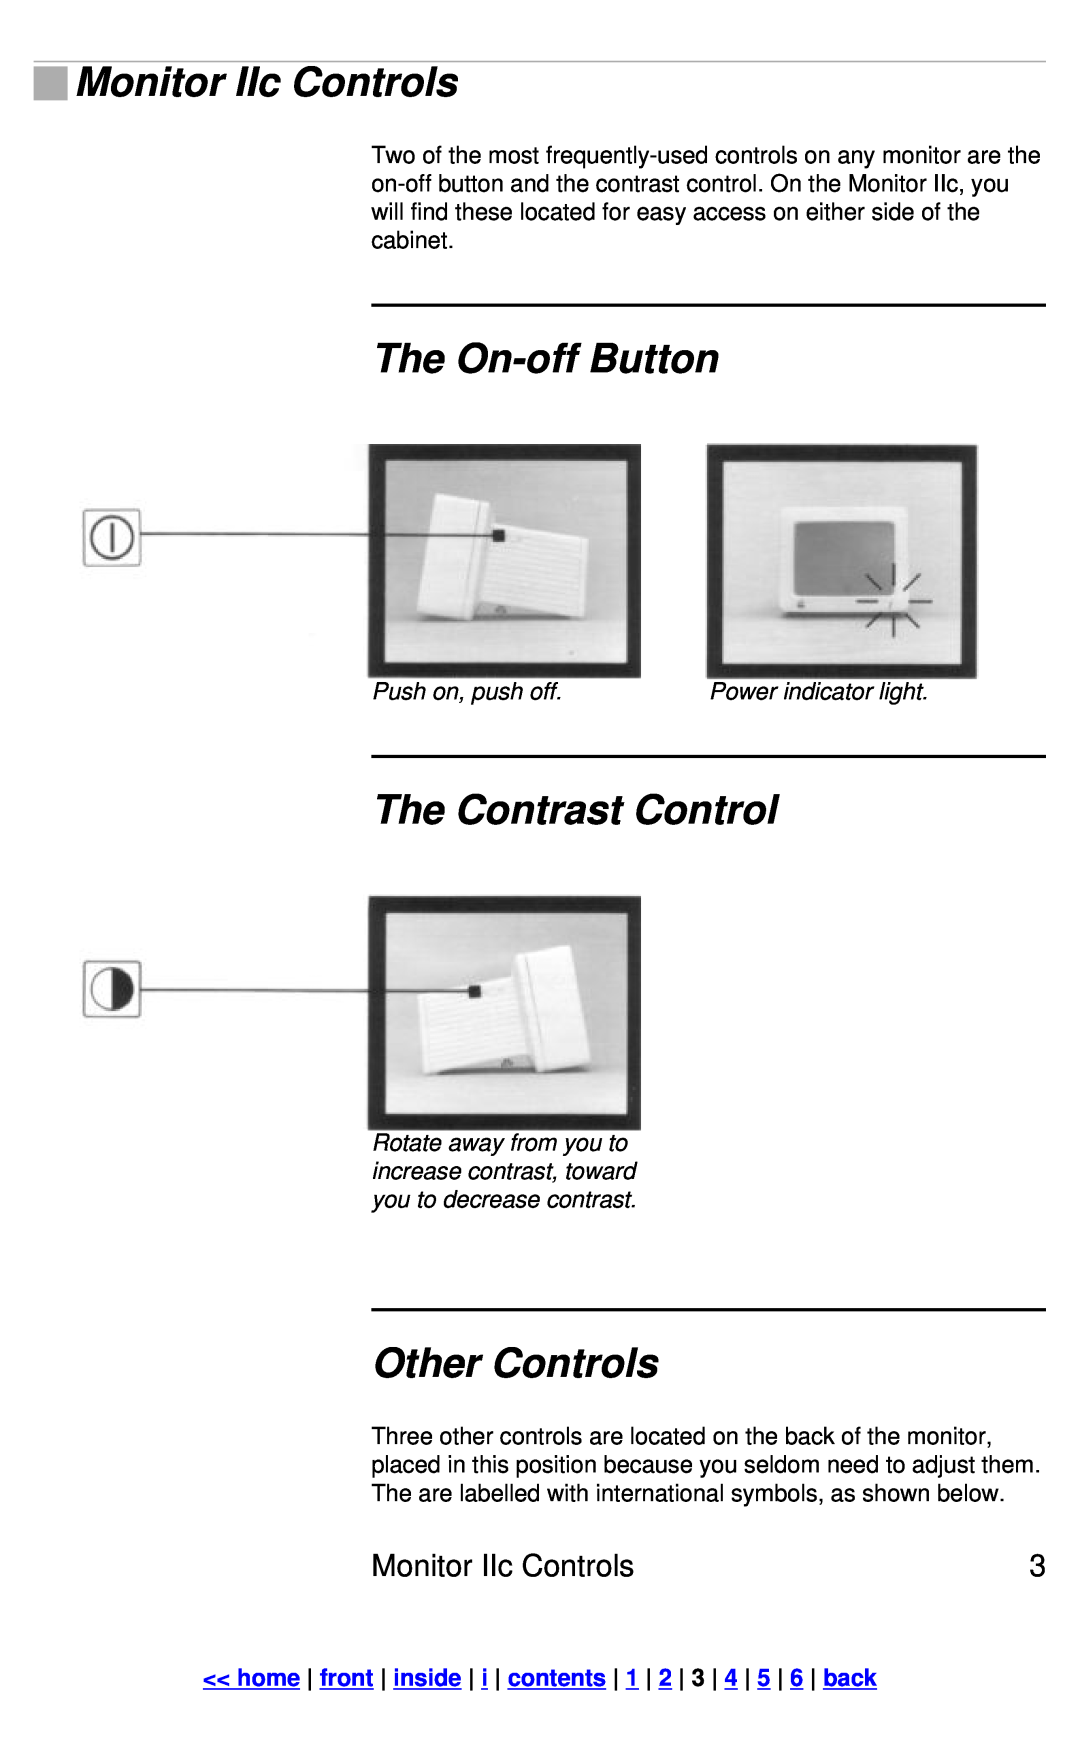 Apple manual Monitor IIc Controls, The On-off Button, The Contrast Control, Other Controls, Push on, push off 